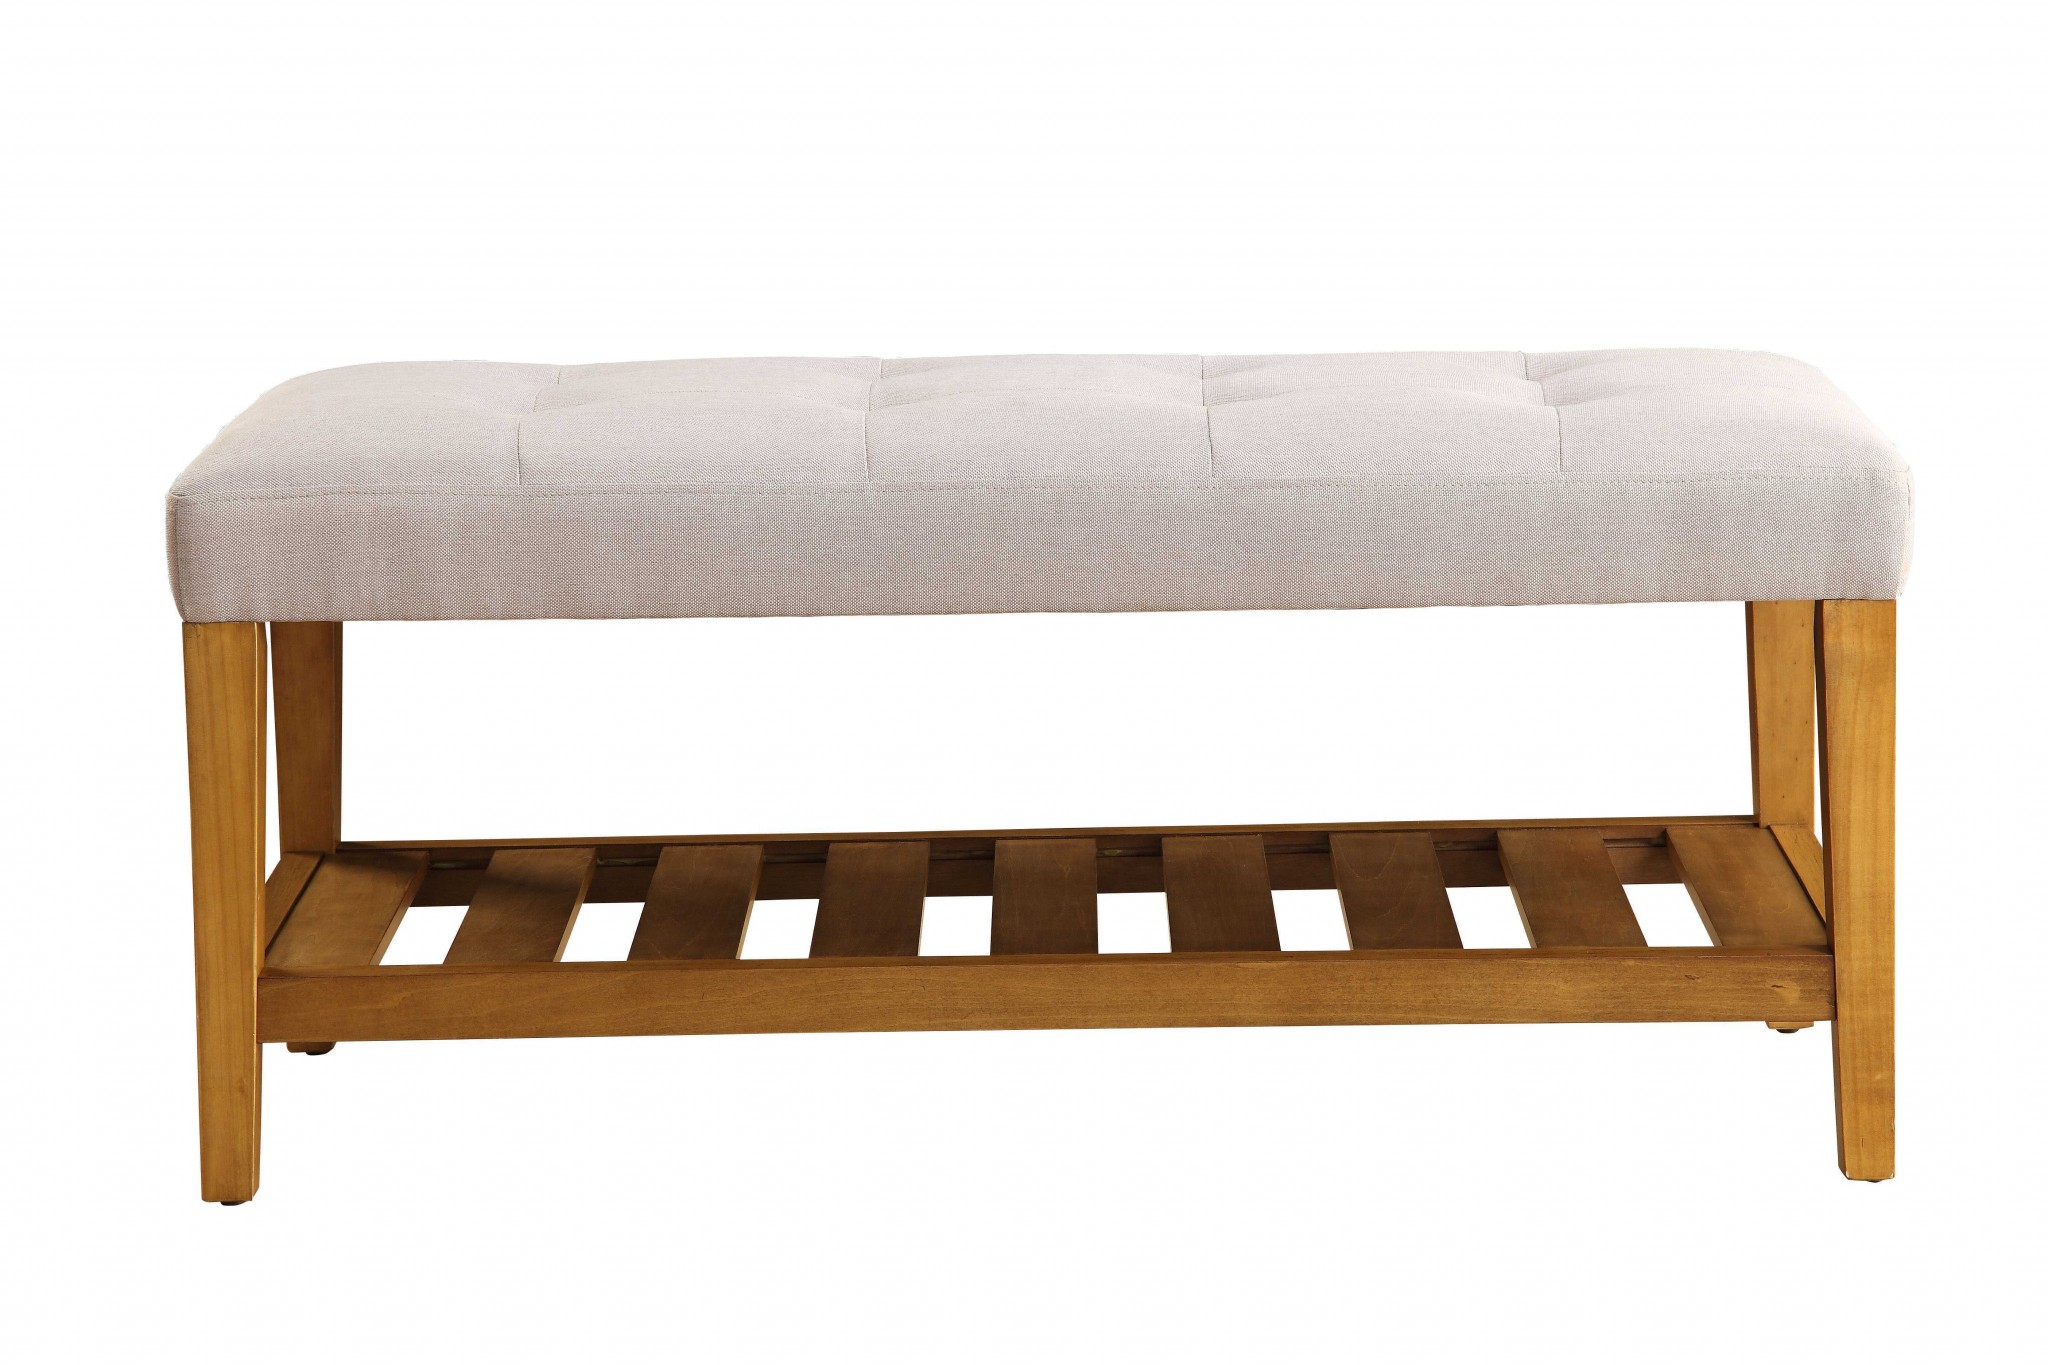 40" X 16" X 18" Light Gray And Oak Simple Bench